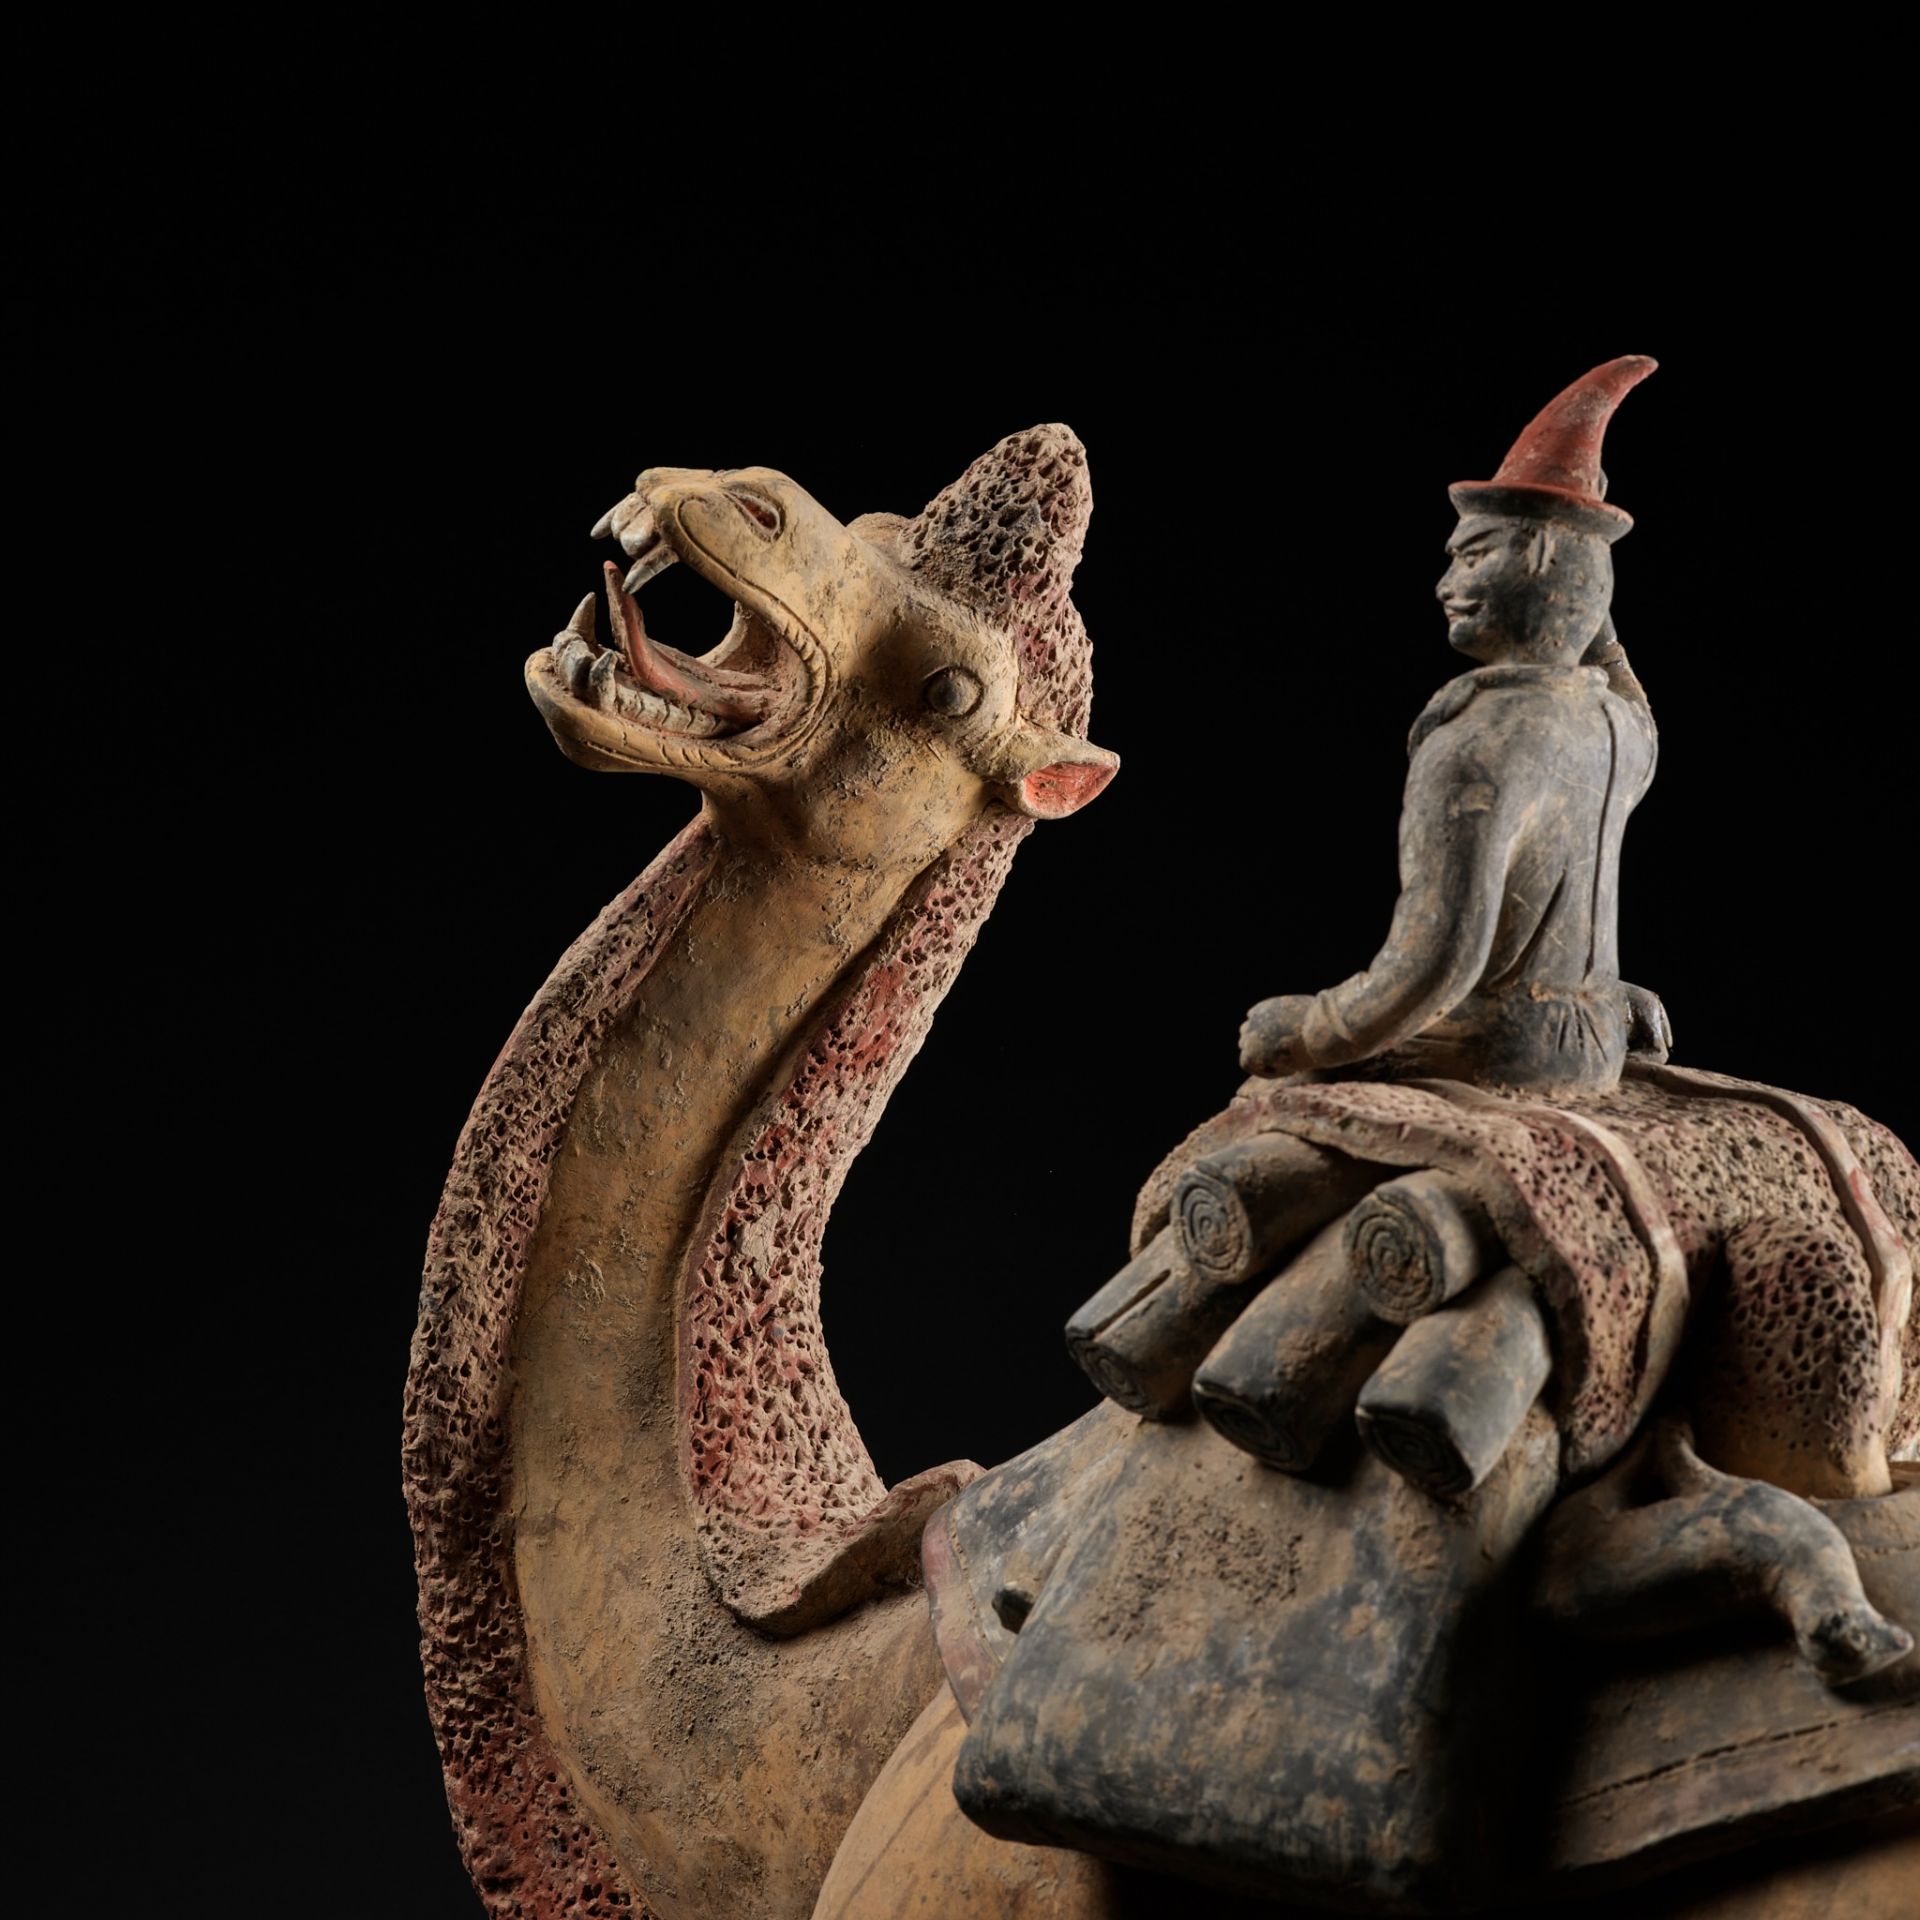 AN EXCEPTIONALLY LARGE PAINTED POTTERY FIGURE OF A BACTRIAN CAMEL AND A SOGDIAN RIDER, TANG DYNASTY - Image 9 of 12